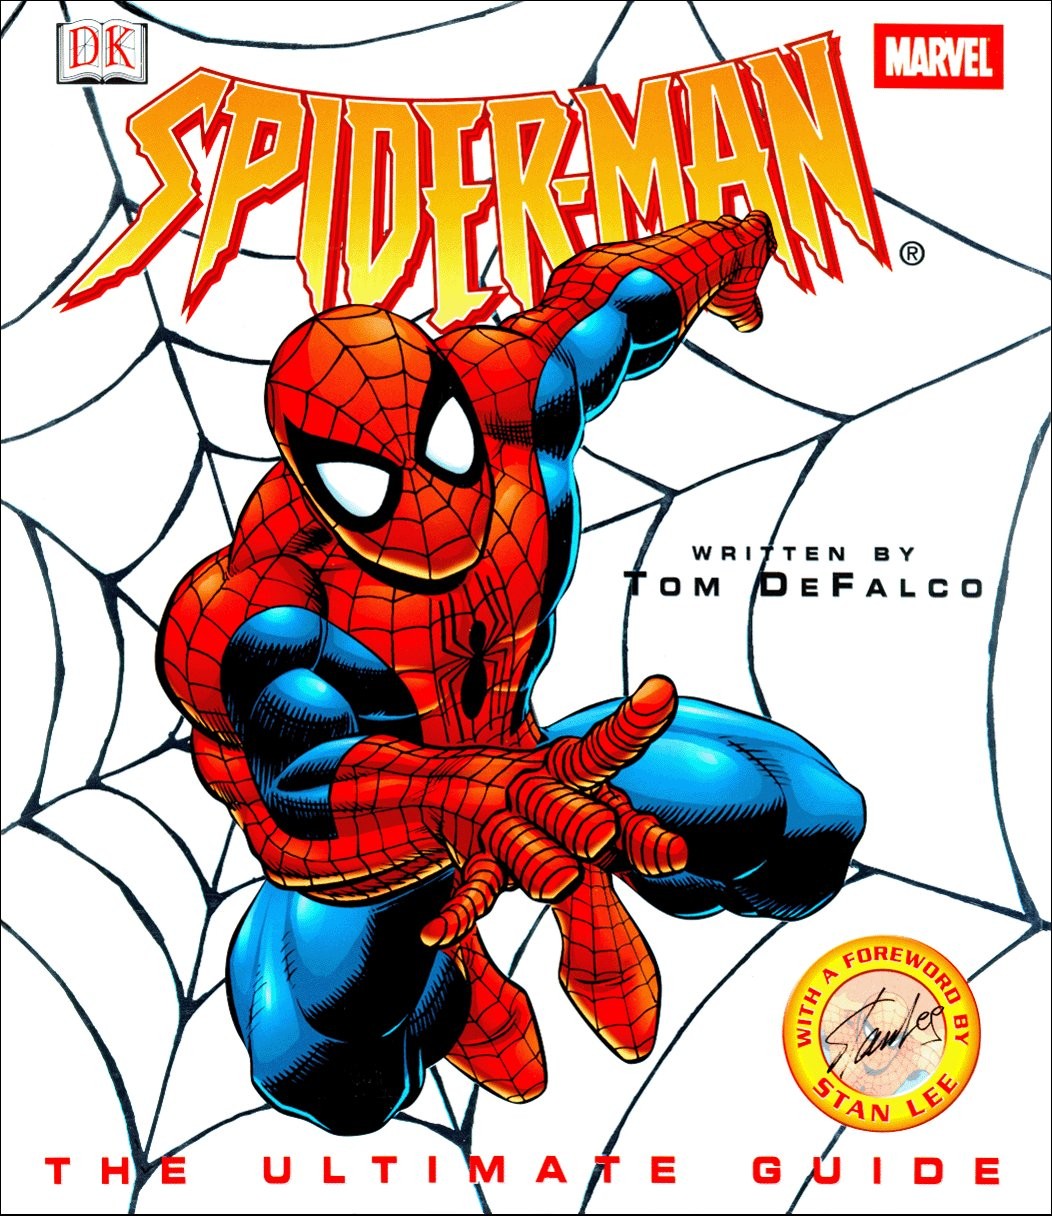 Spider-Man The Ultimate Guide Vol. 1 #1